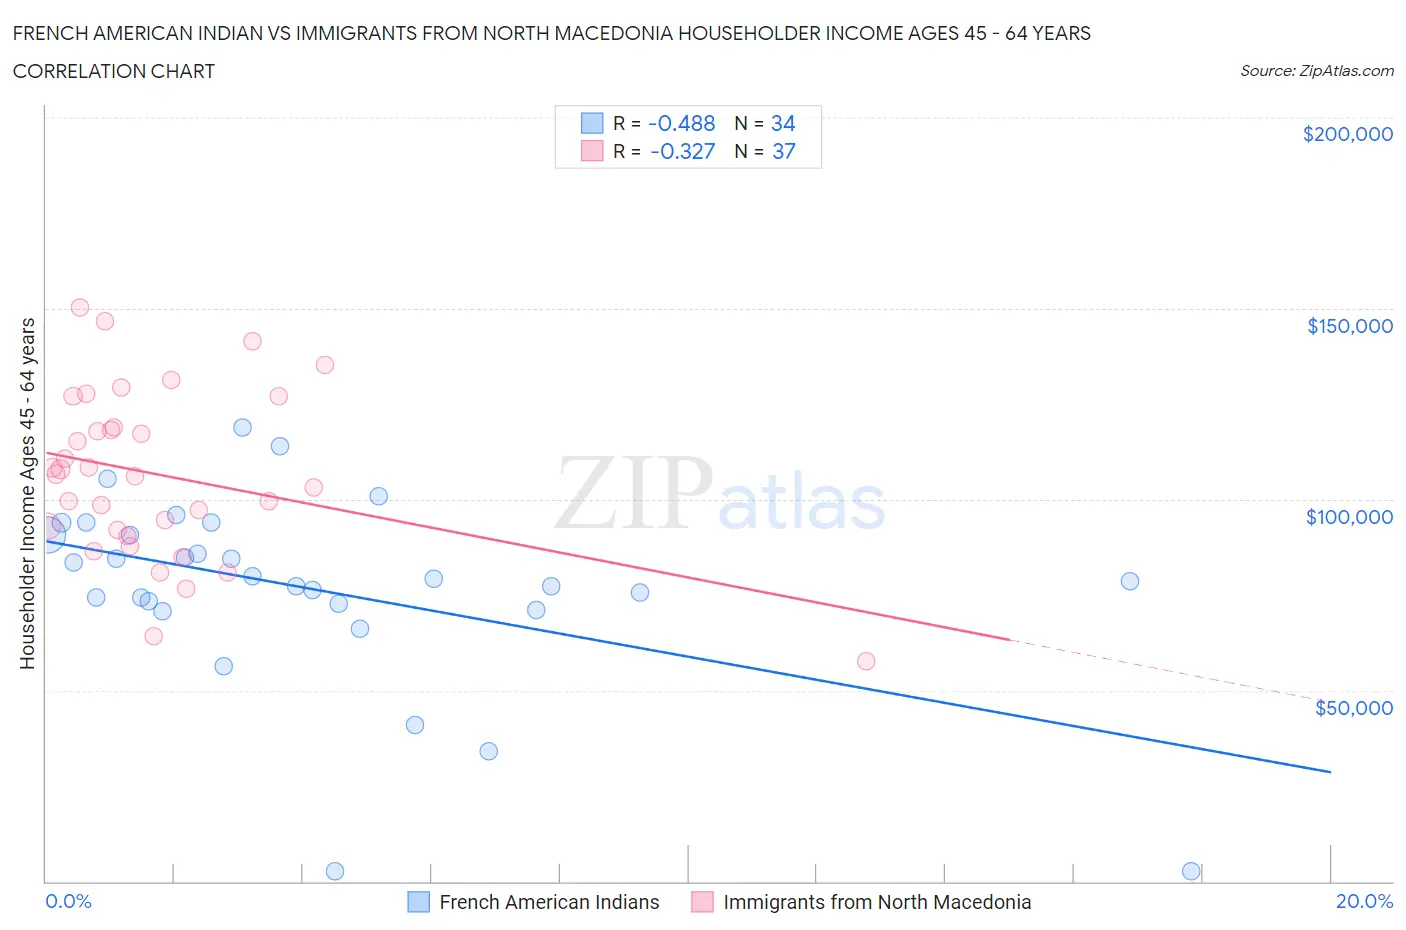 French American Indian vs Immigrants from North Macedonia Householder Income Ages 45 - 64 years